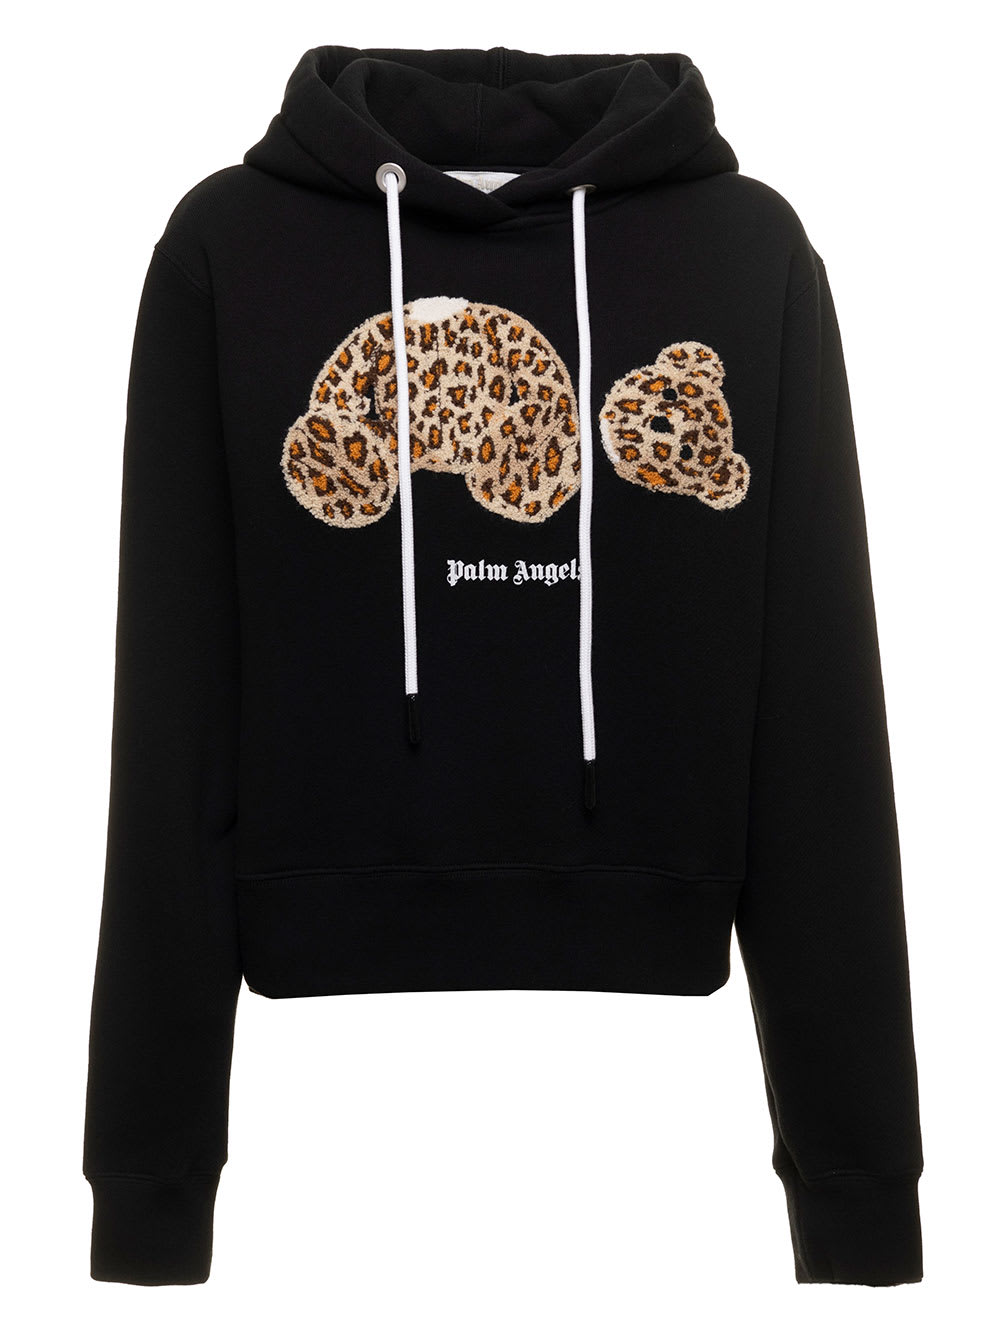 Palm Angels Woman s Black Cotton Hoodie With Leopard Bear Print